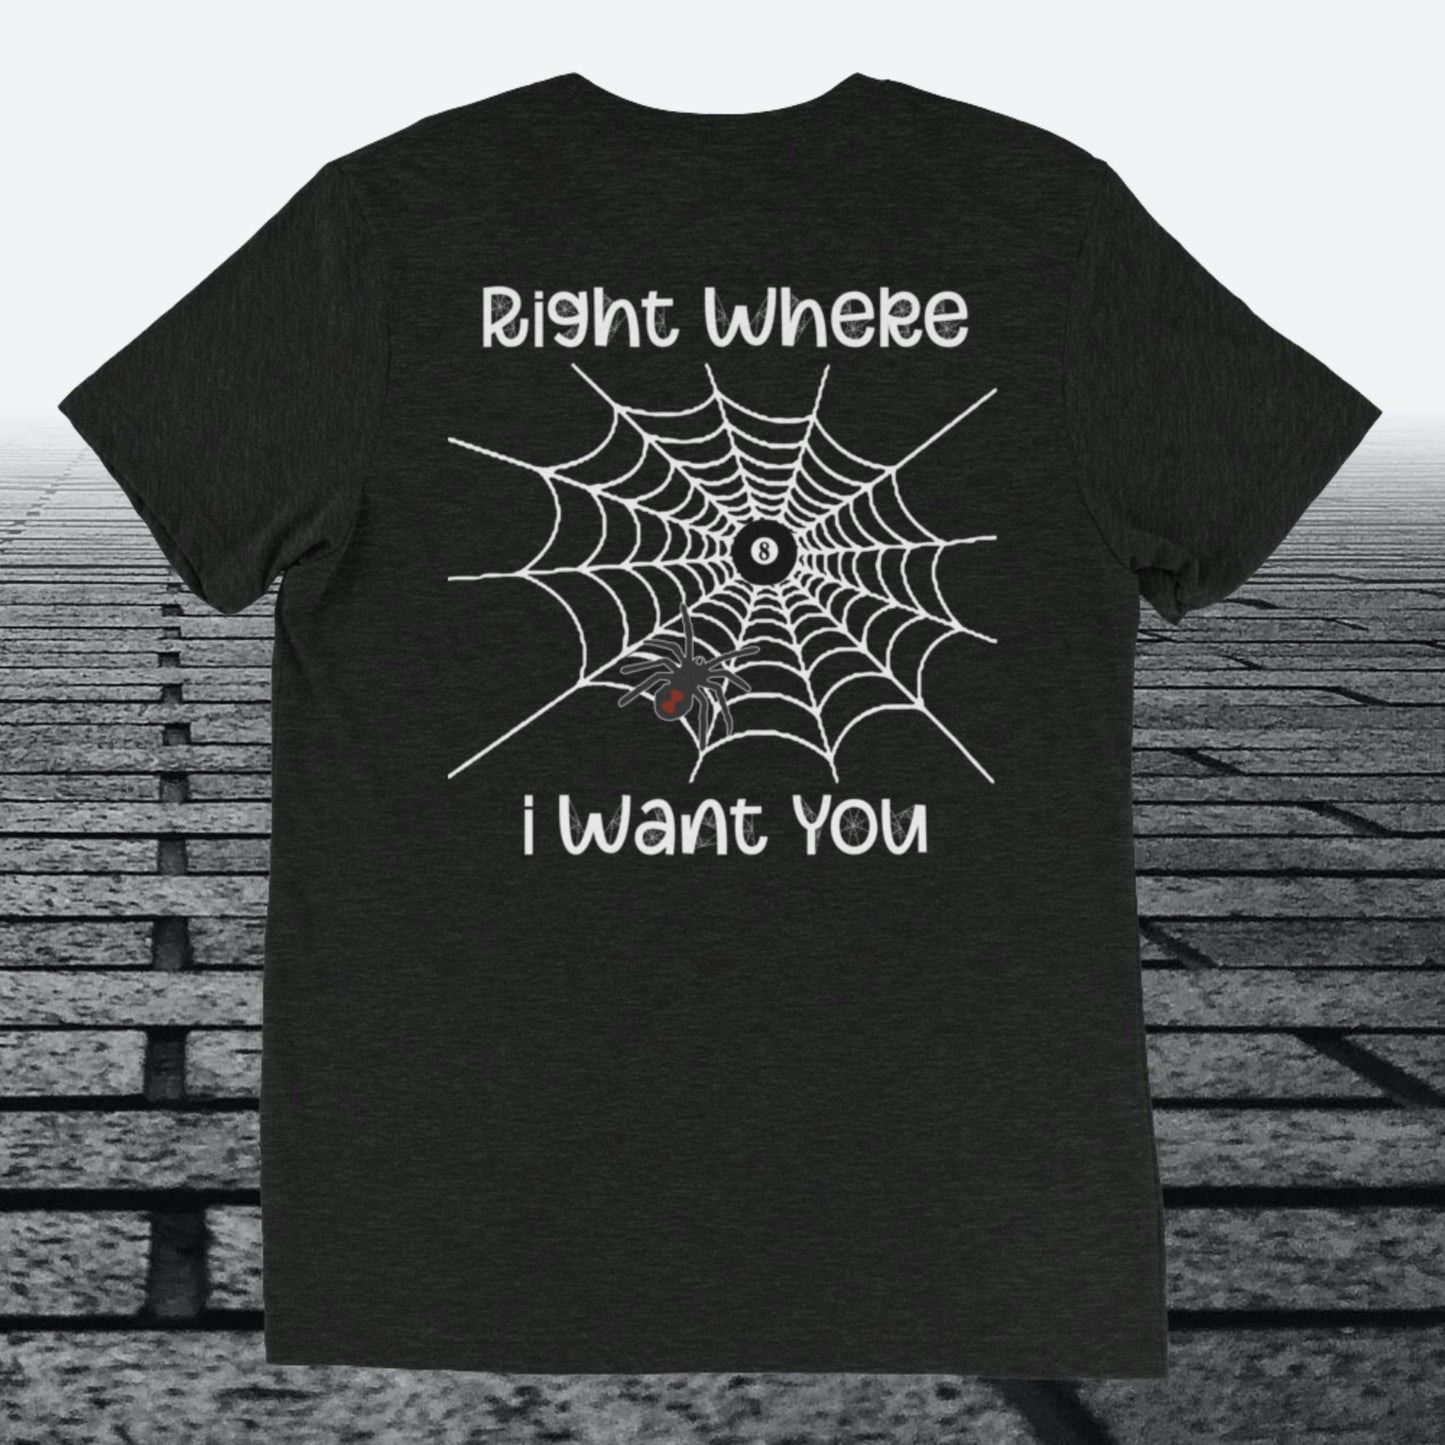 Right Where I Want You with white web, logo on the front, Tri-blend t-shirt